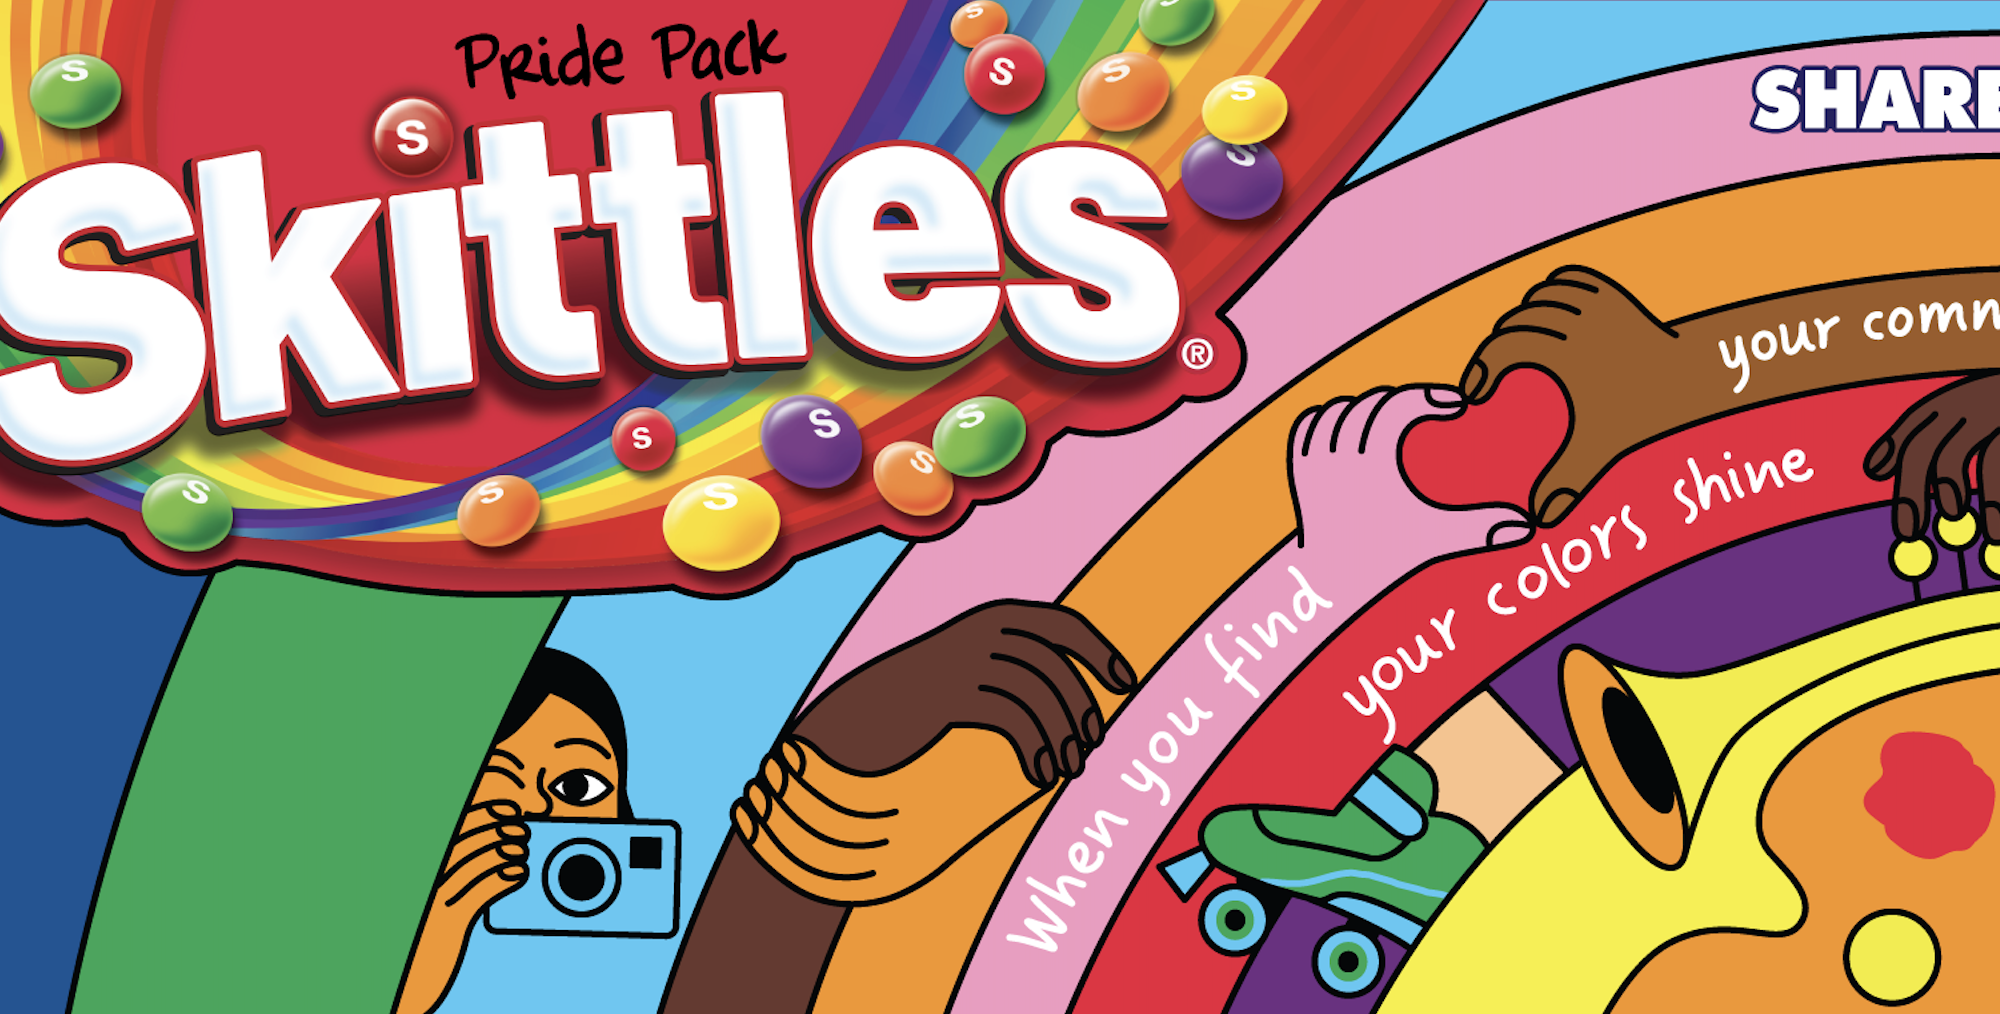 Pridepackfinal - Nerd Blog - Nerd Productions Teamed Up With Weber Shandwick To Design The Limited Edition Skittles  Pride Packs For This Year'S Pride Campaign